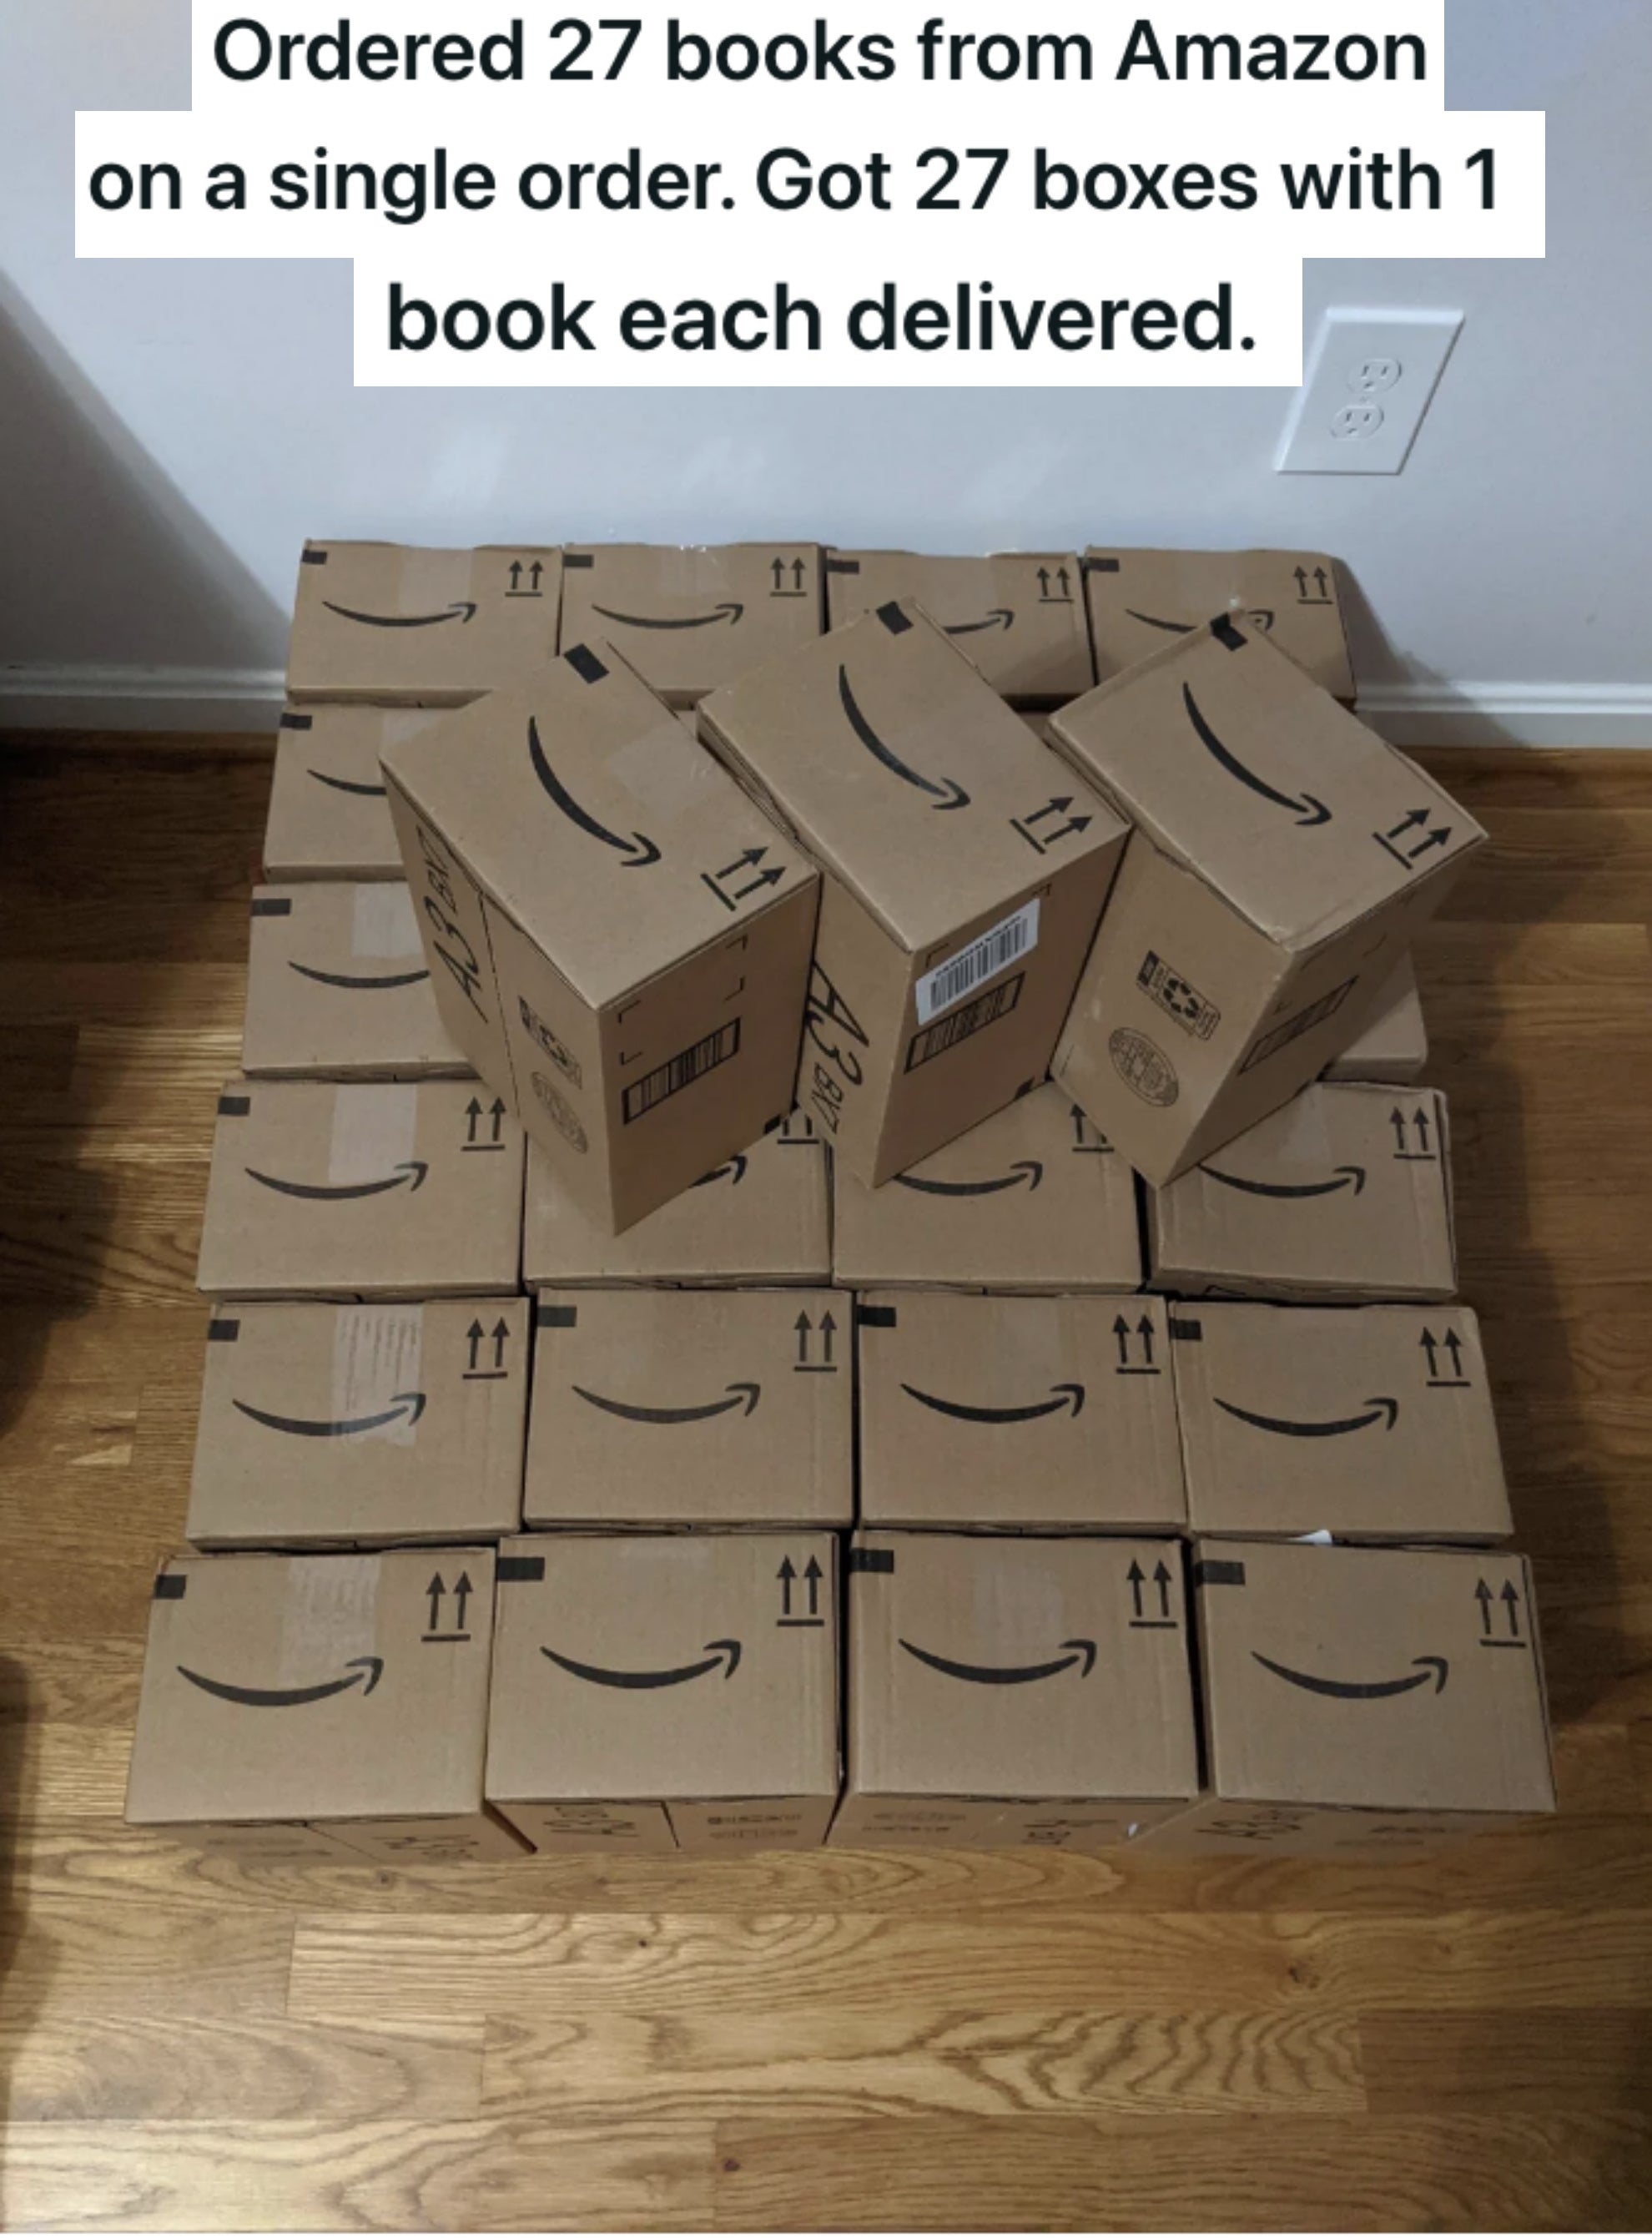 a bunch of Amazon packages on the floor